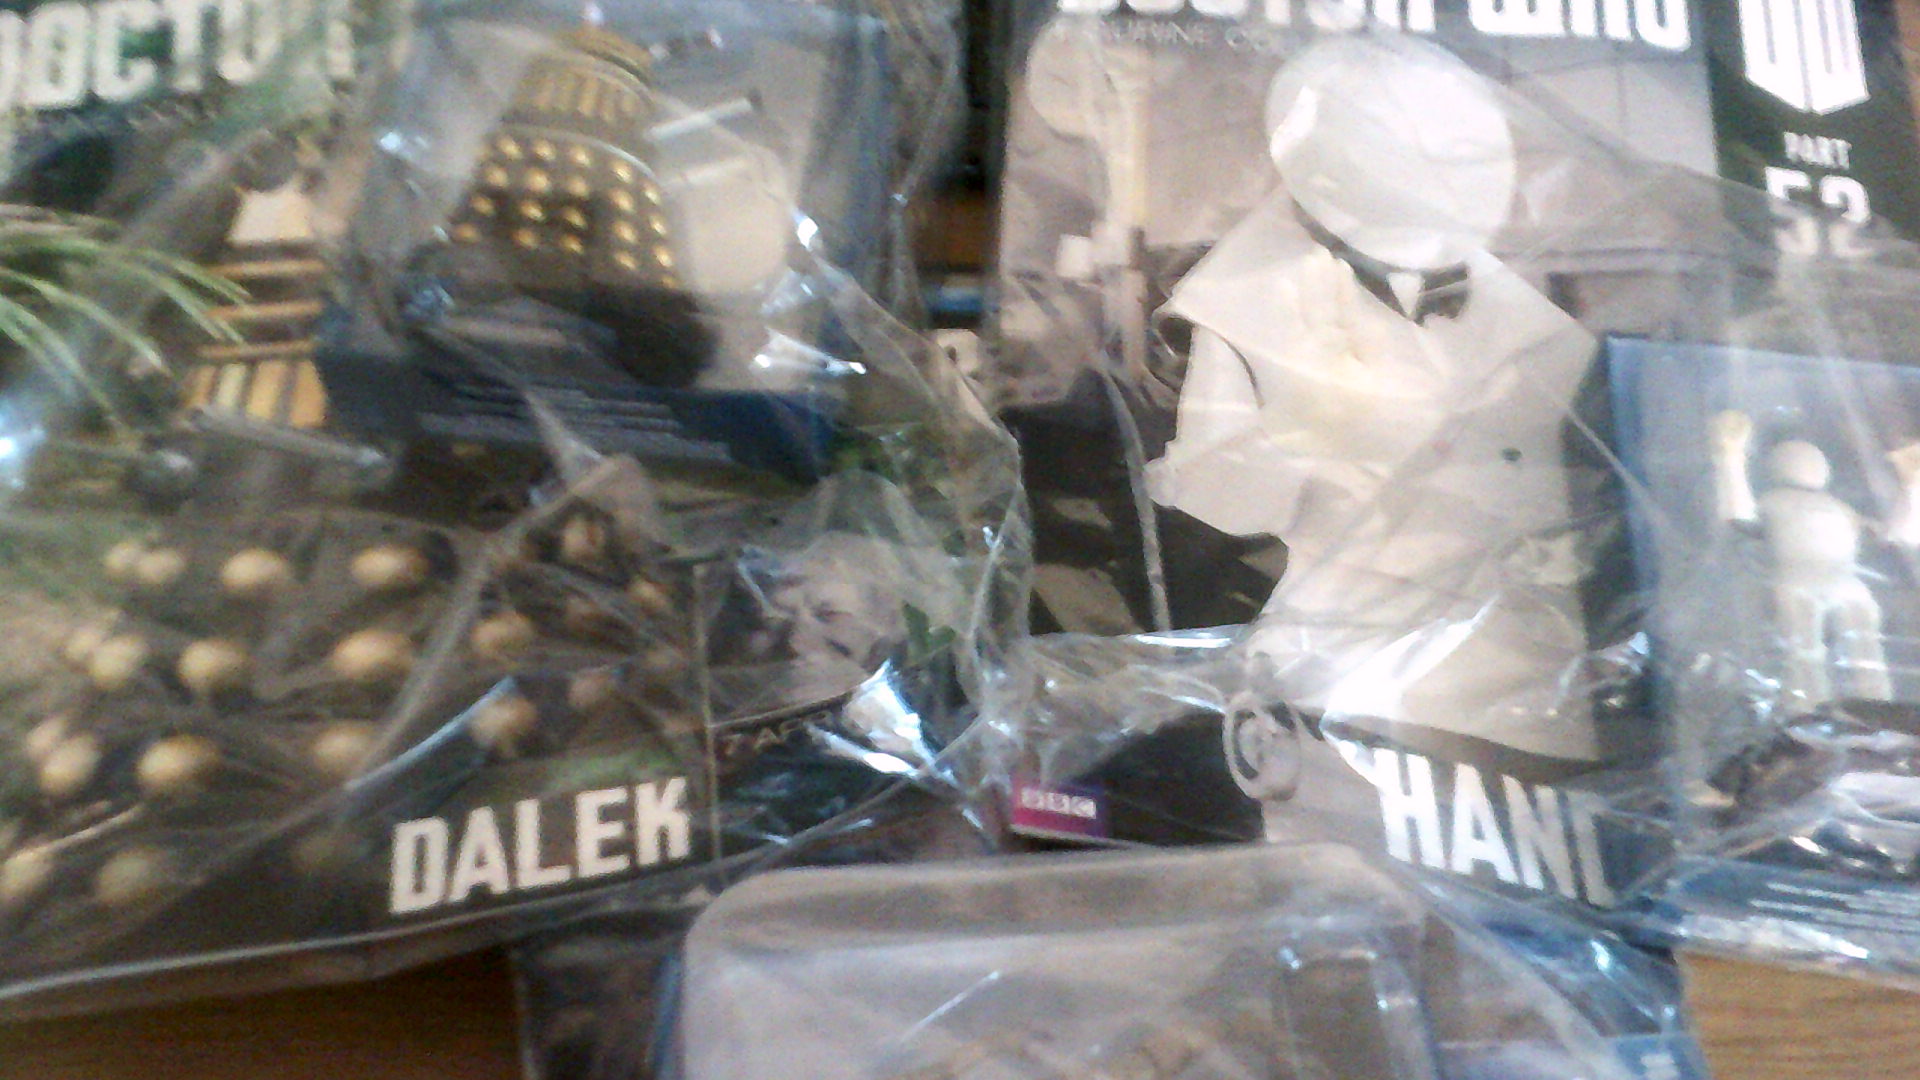 Dr Who-(3) original figures with magazines unopened